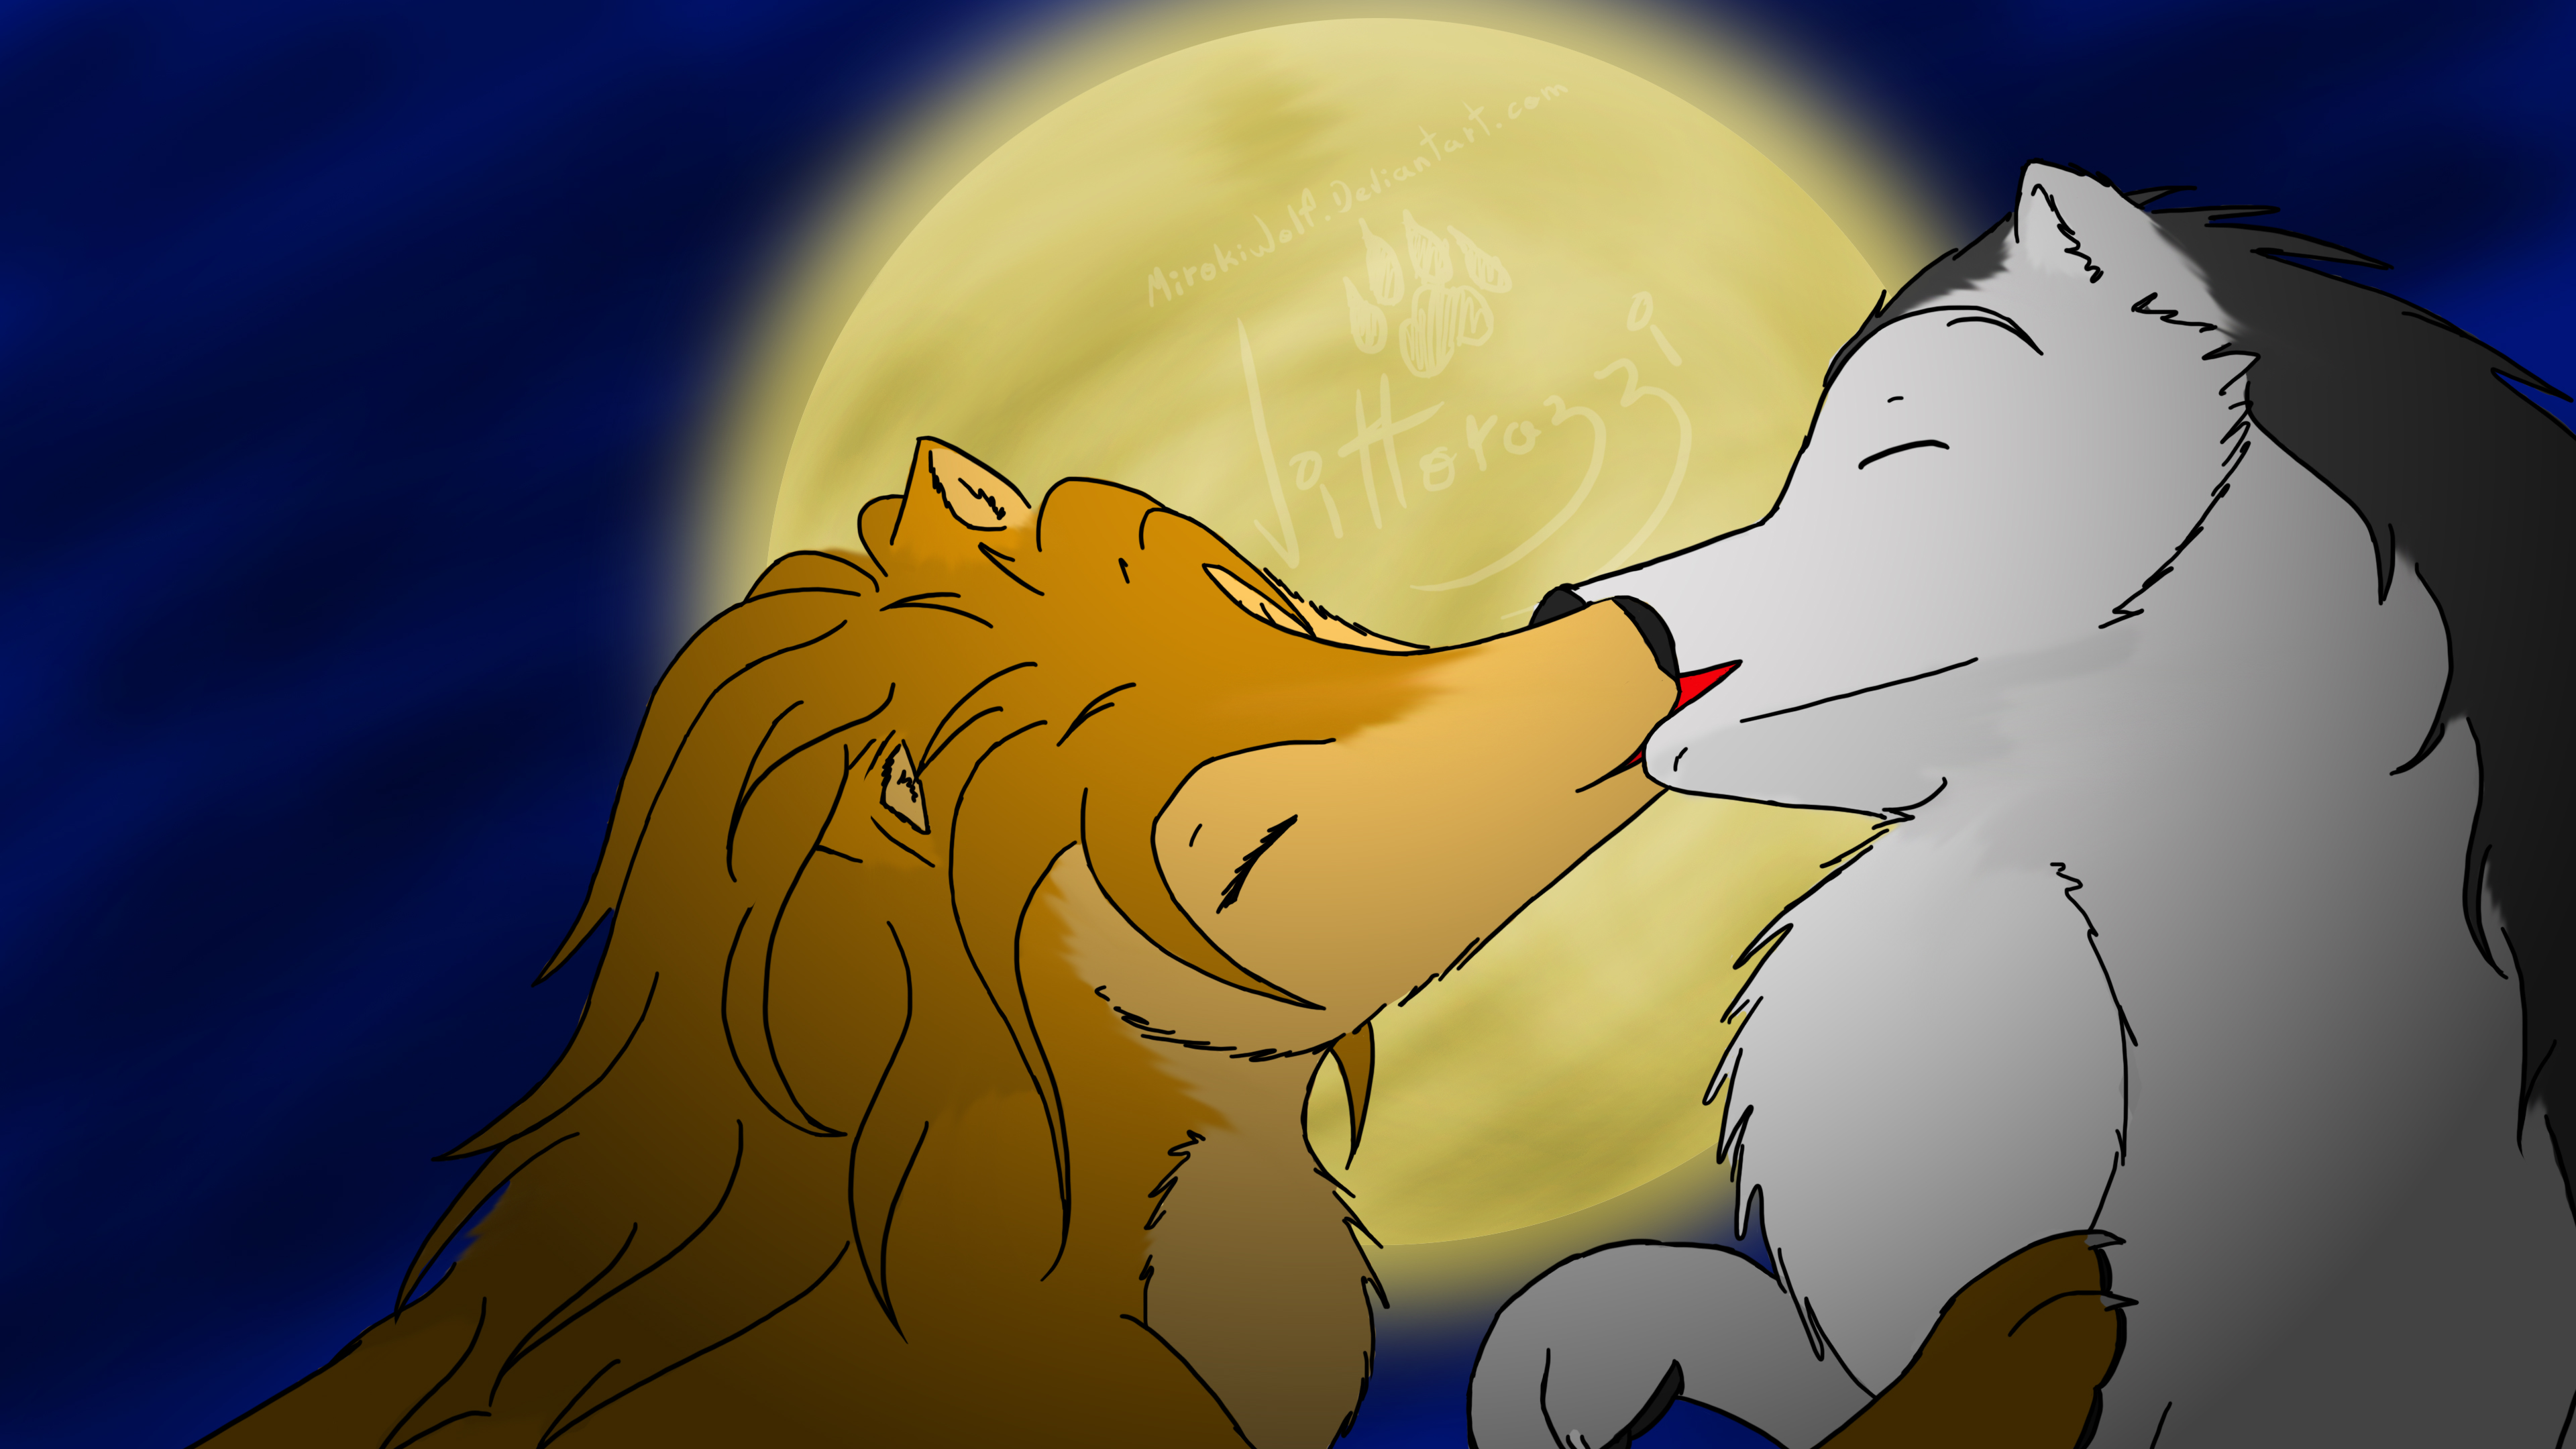 Fan Art of Moonlight Kiss for fans of Alpha and Omega. 